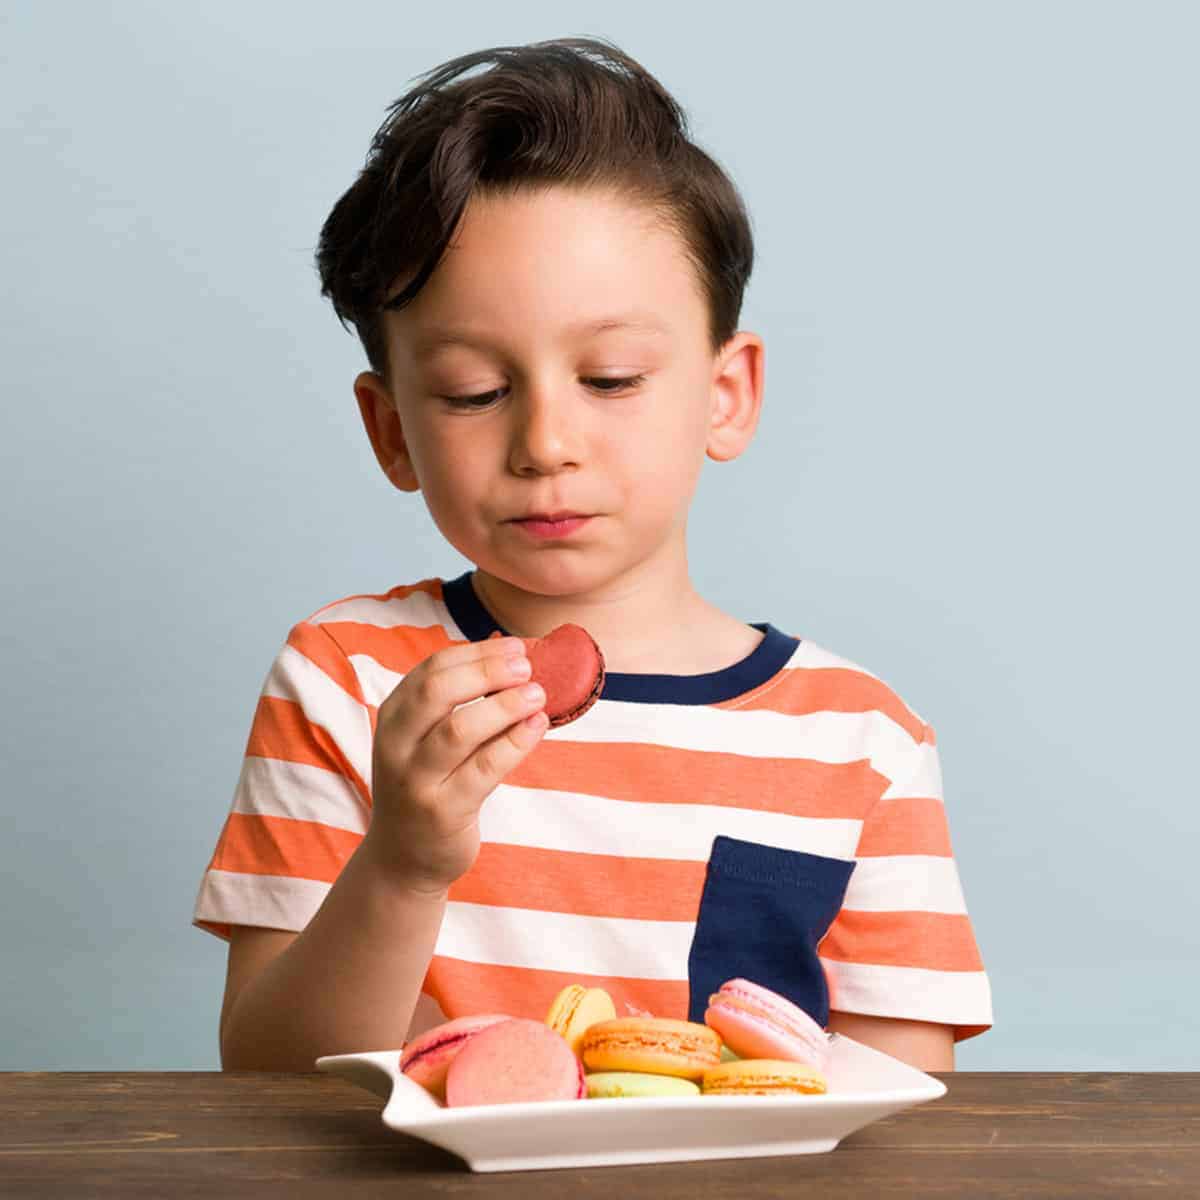 8 Secret Strategies for Sensory Issues with Food